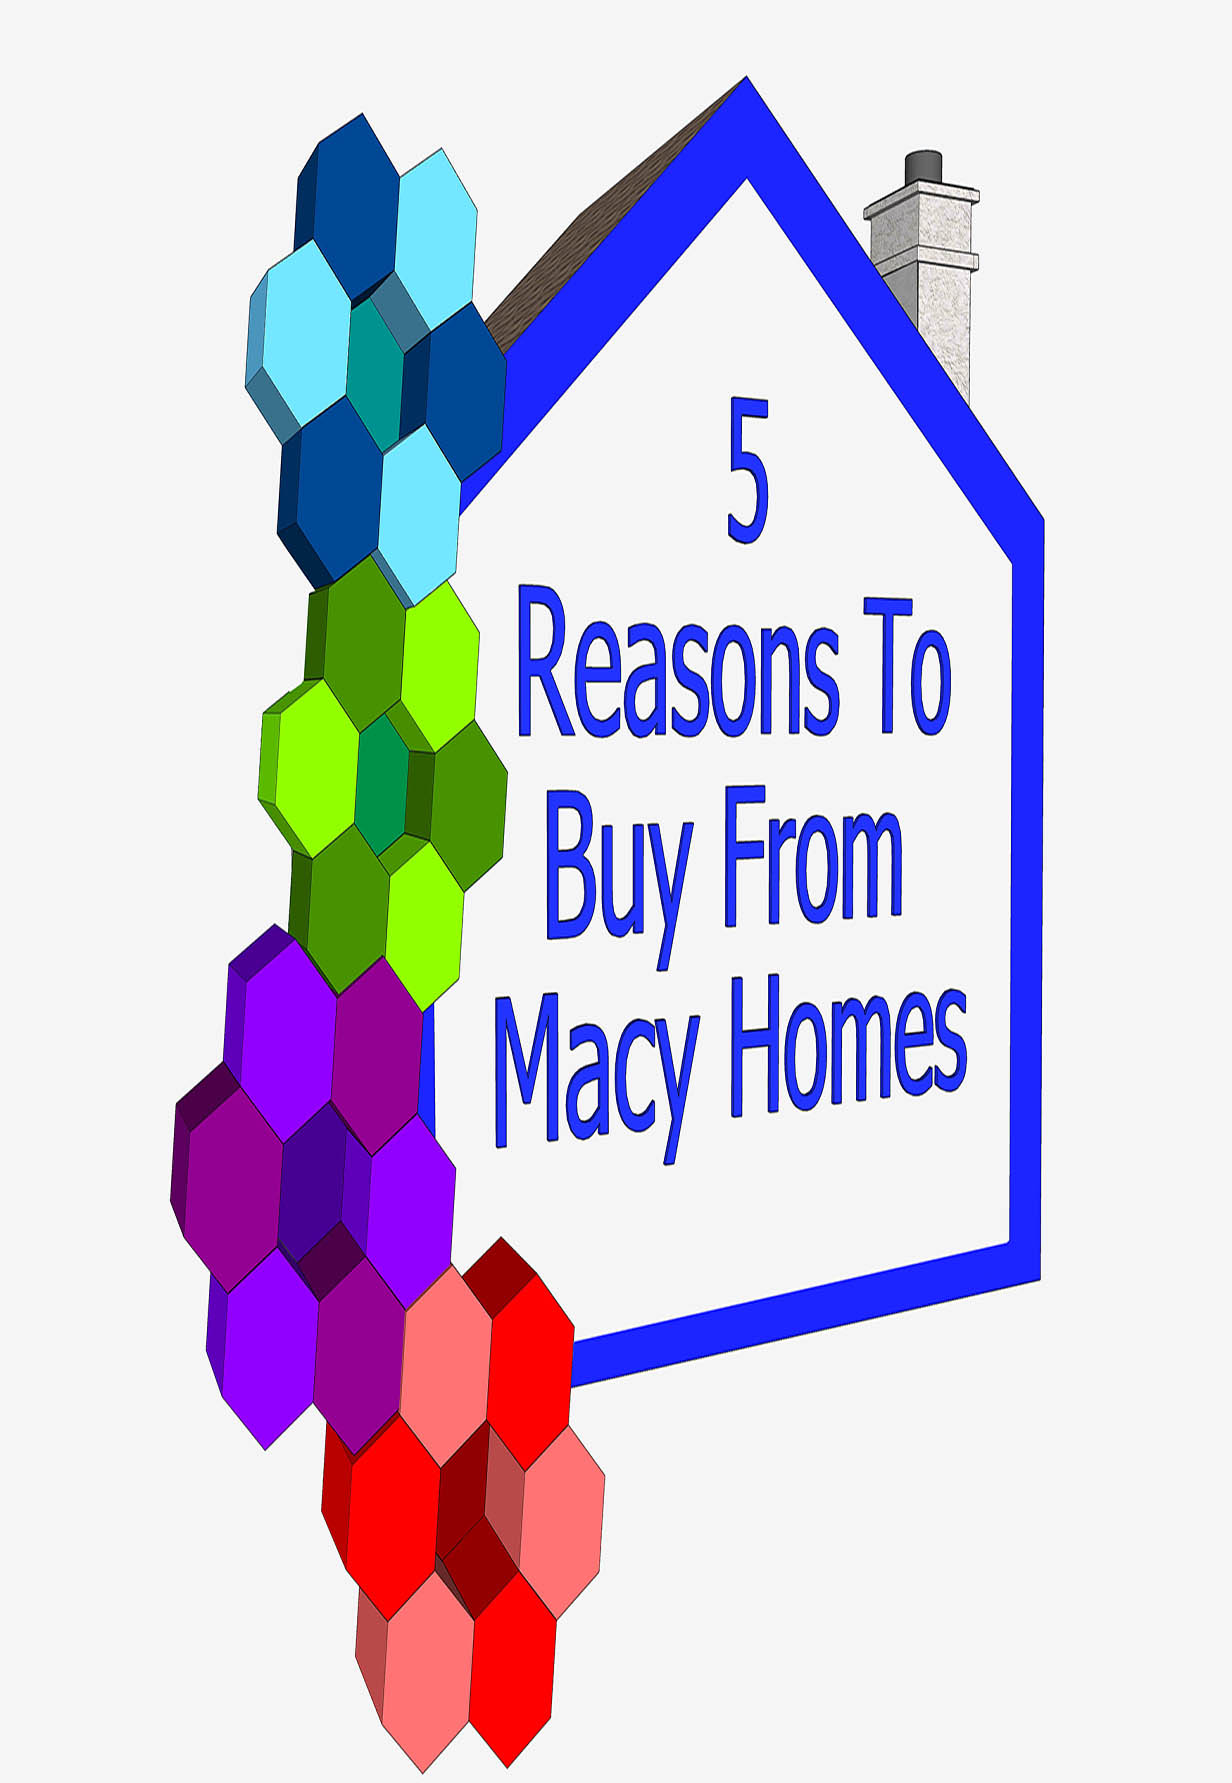 5 Reasons To Buy From Macy Homes